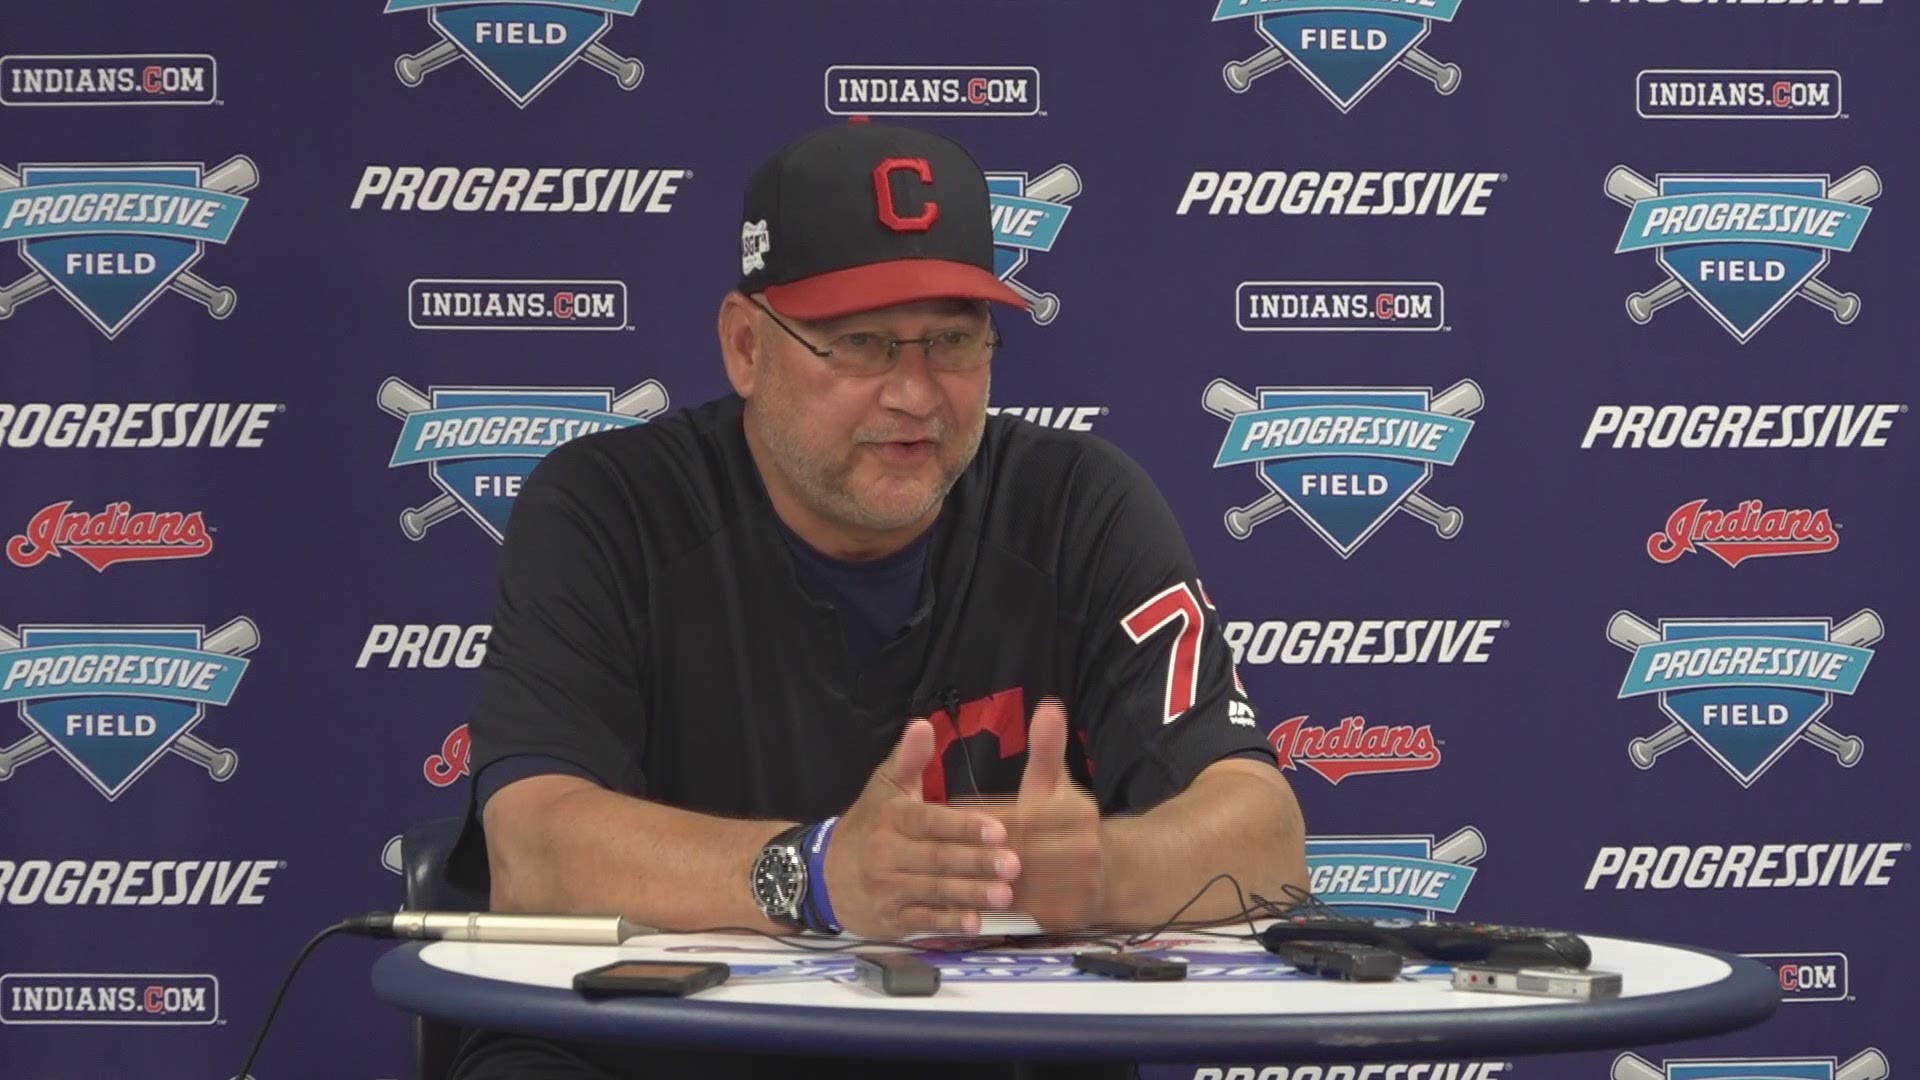 Sox should re-sign Francona, but why rush?